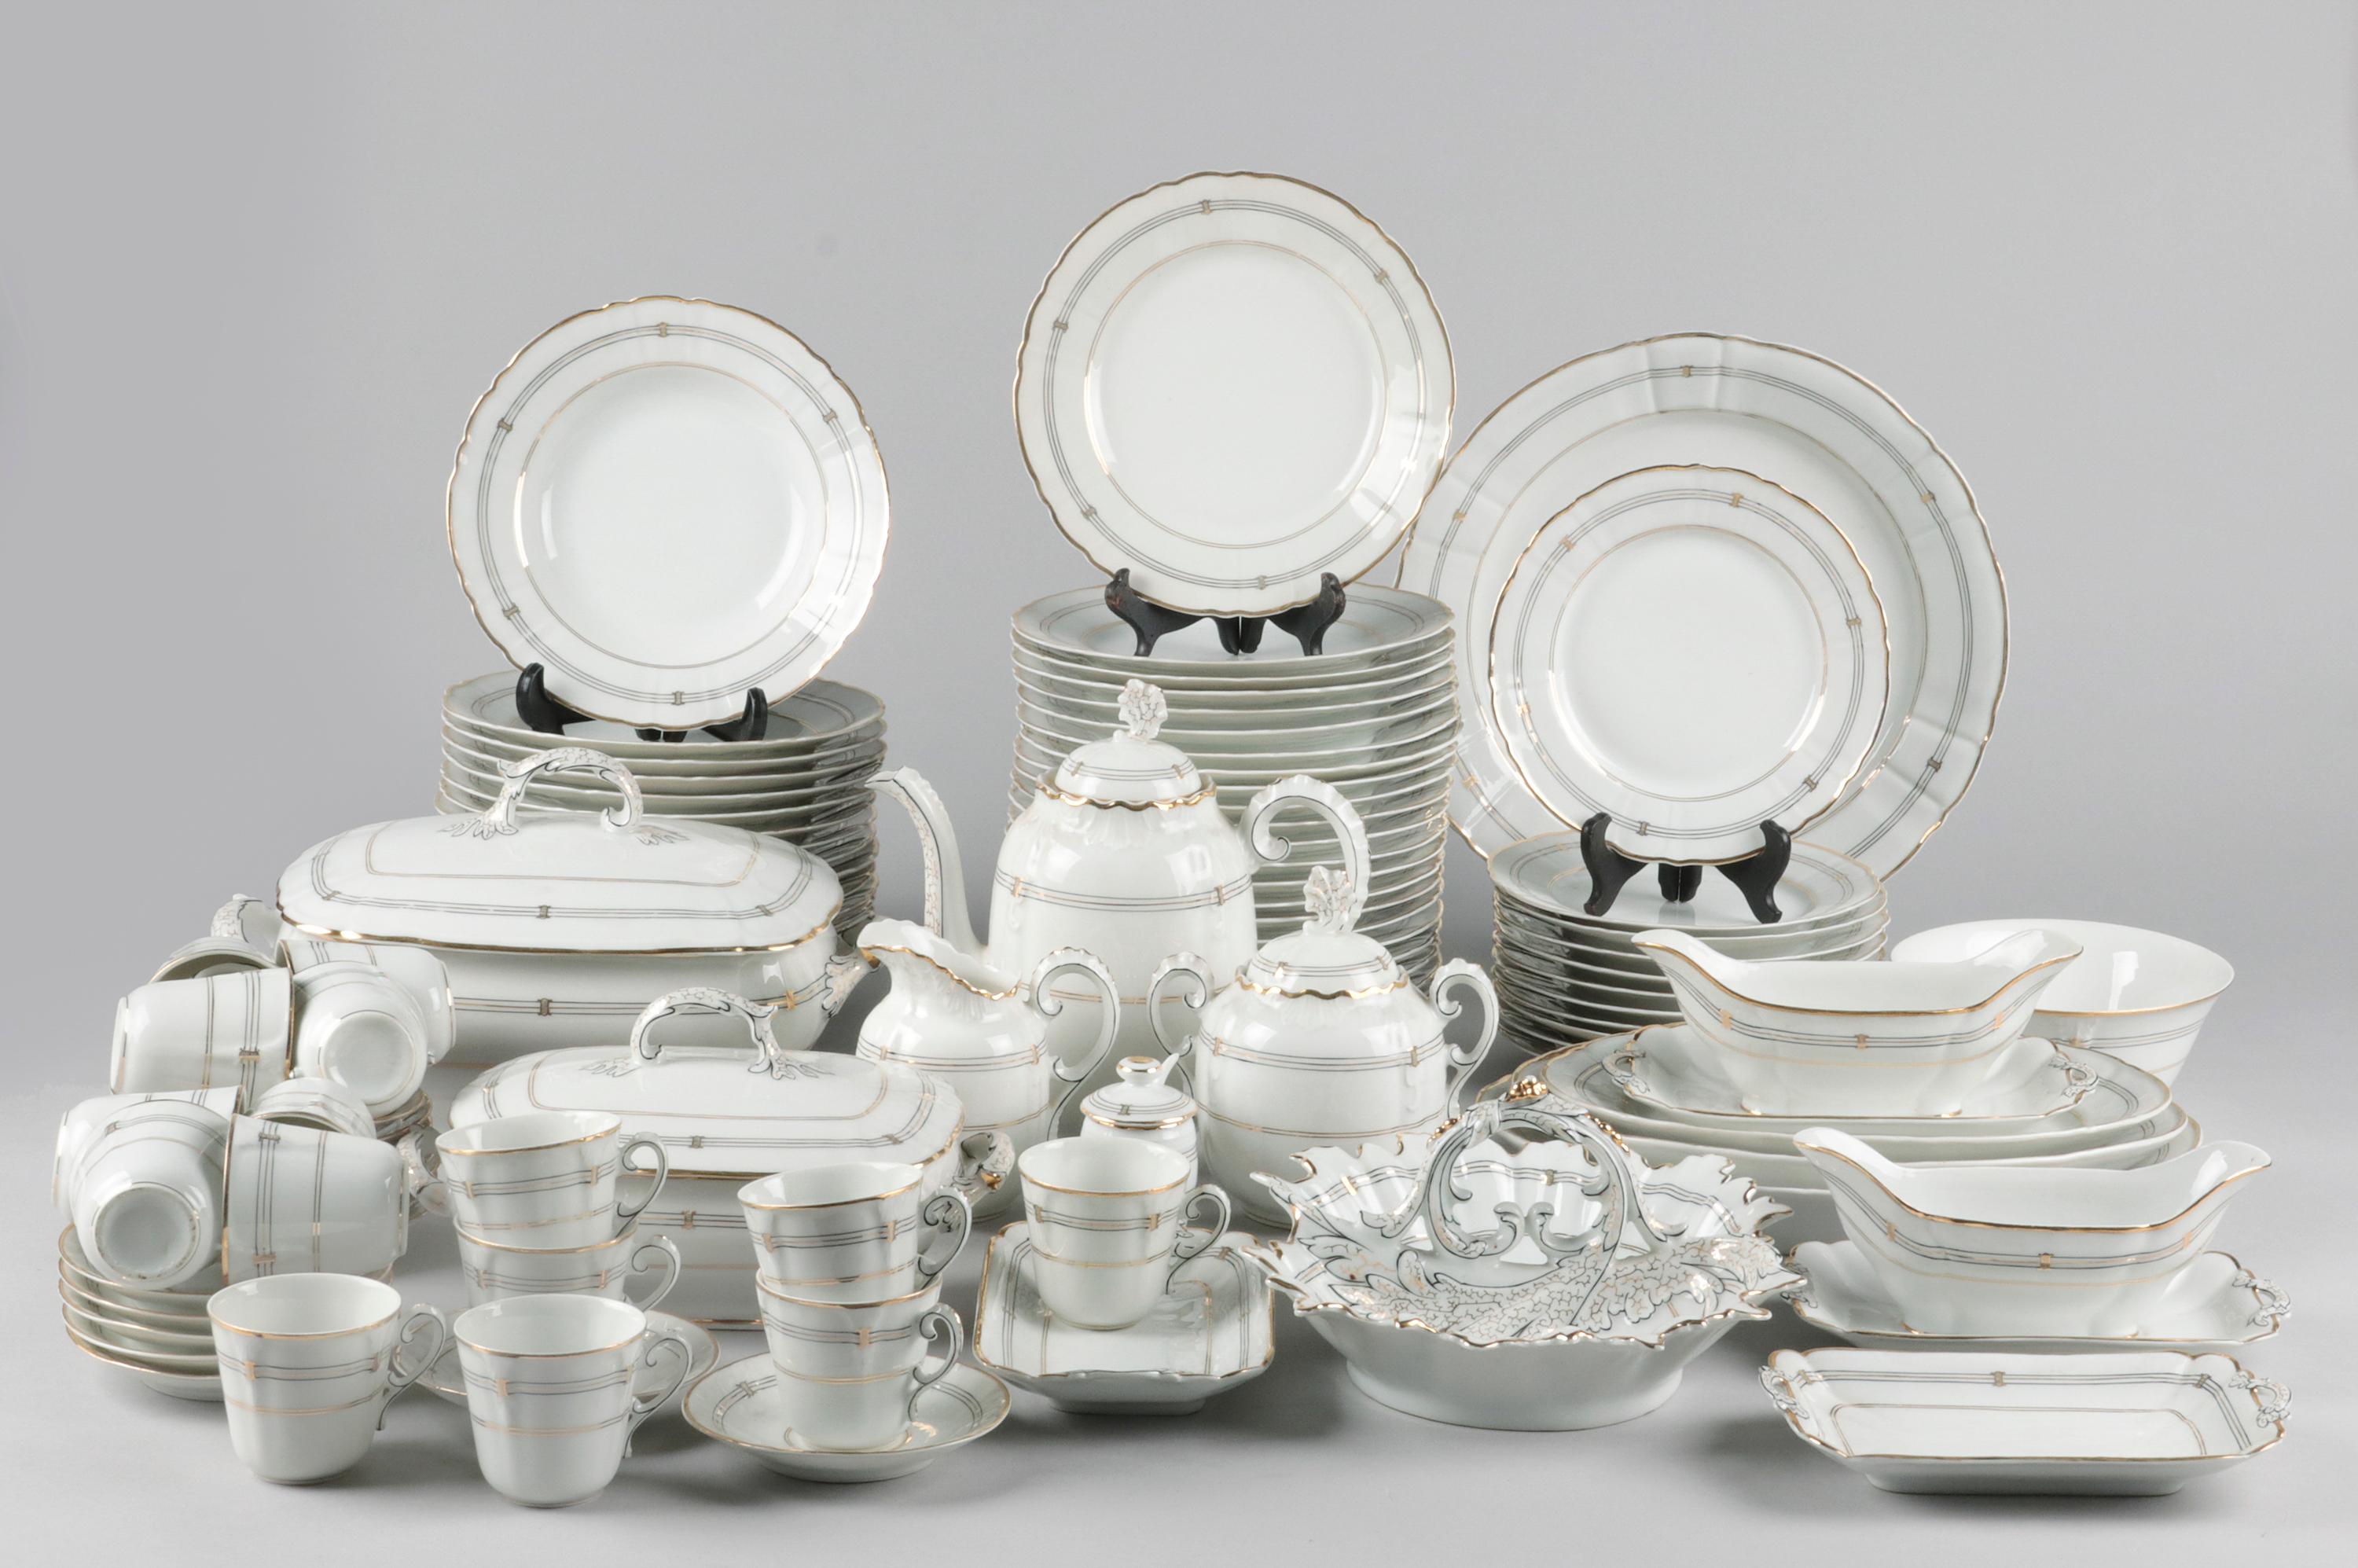 Beautiful antique porcelain tableware. It is an extensive set with many plates and beautiful serving dishes. This type of service is known as 'Vieux Paris', white porcelain from the French capital that was painted with sumptuous decors in many small